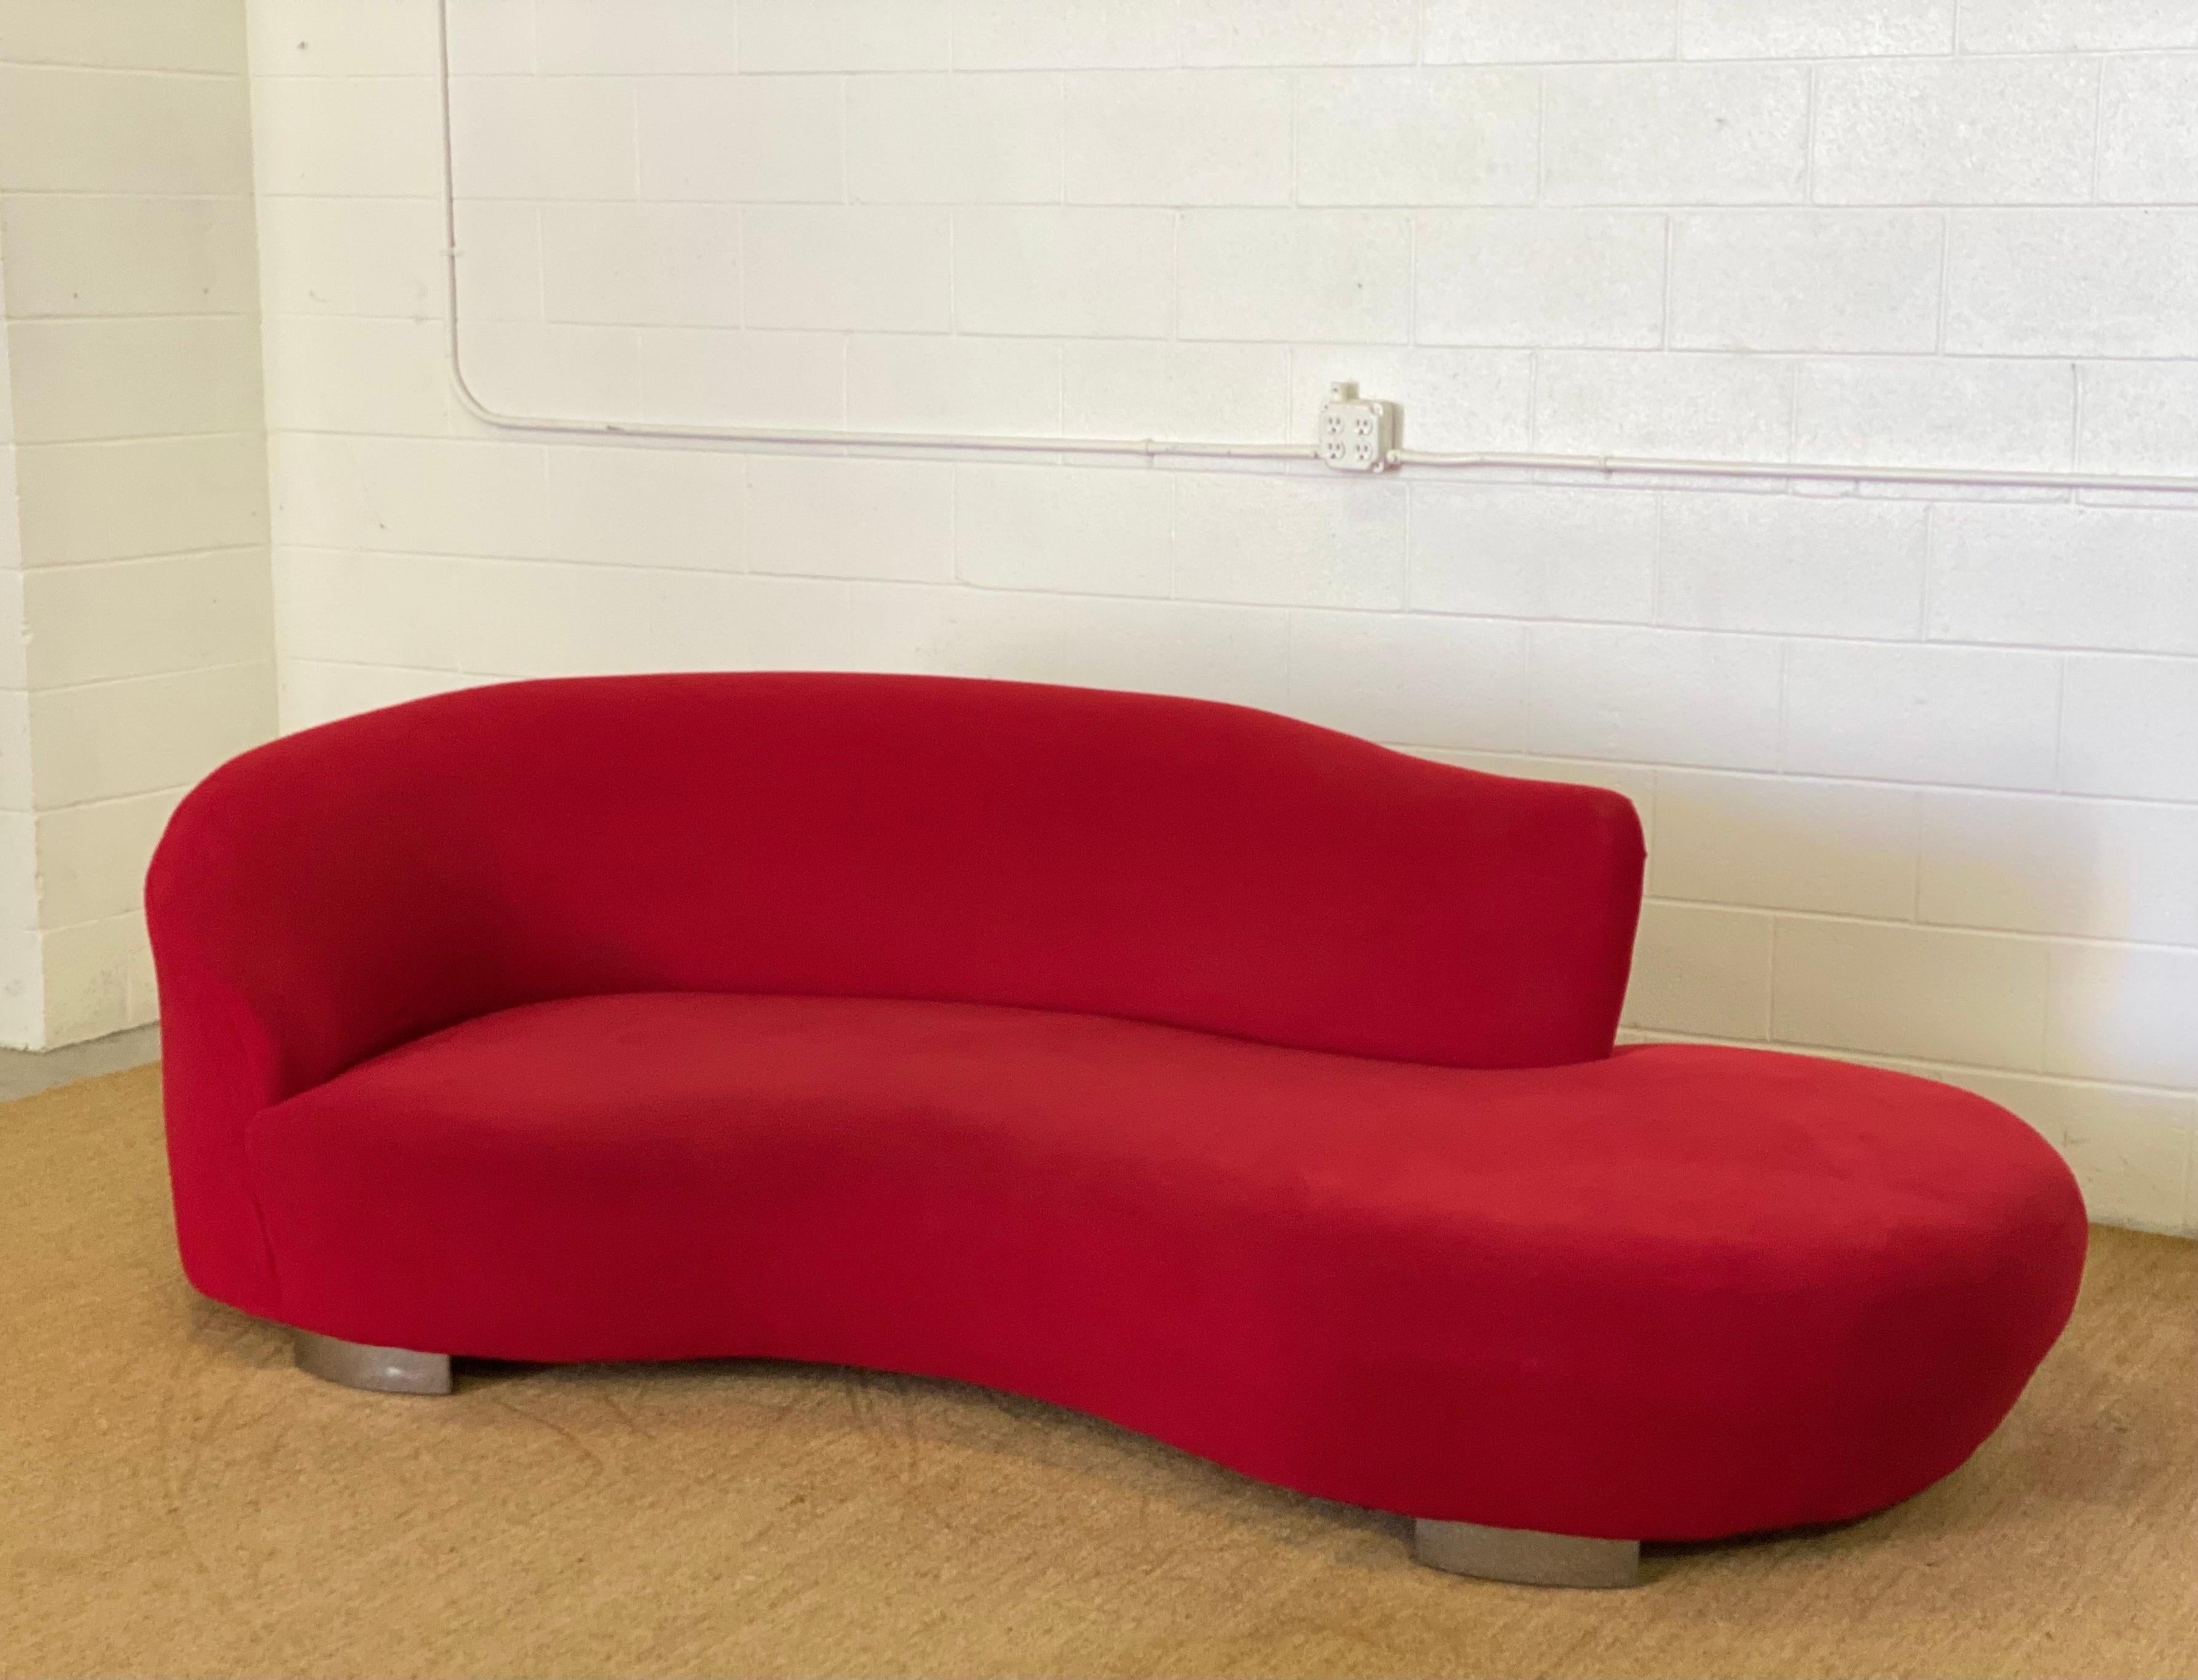 American 1980s Vintage Curved Cloud Red Sofa For Sale